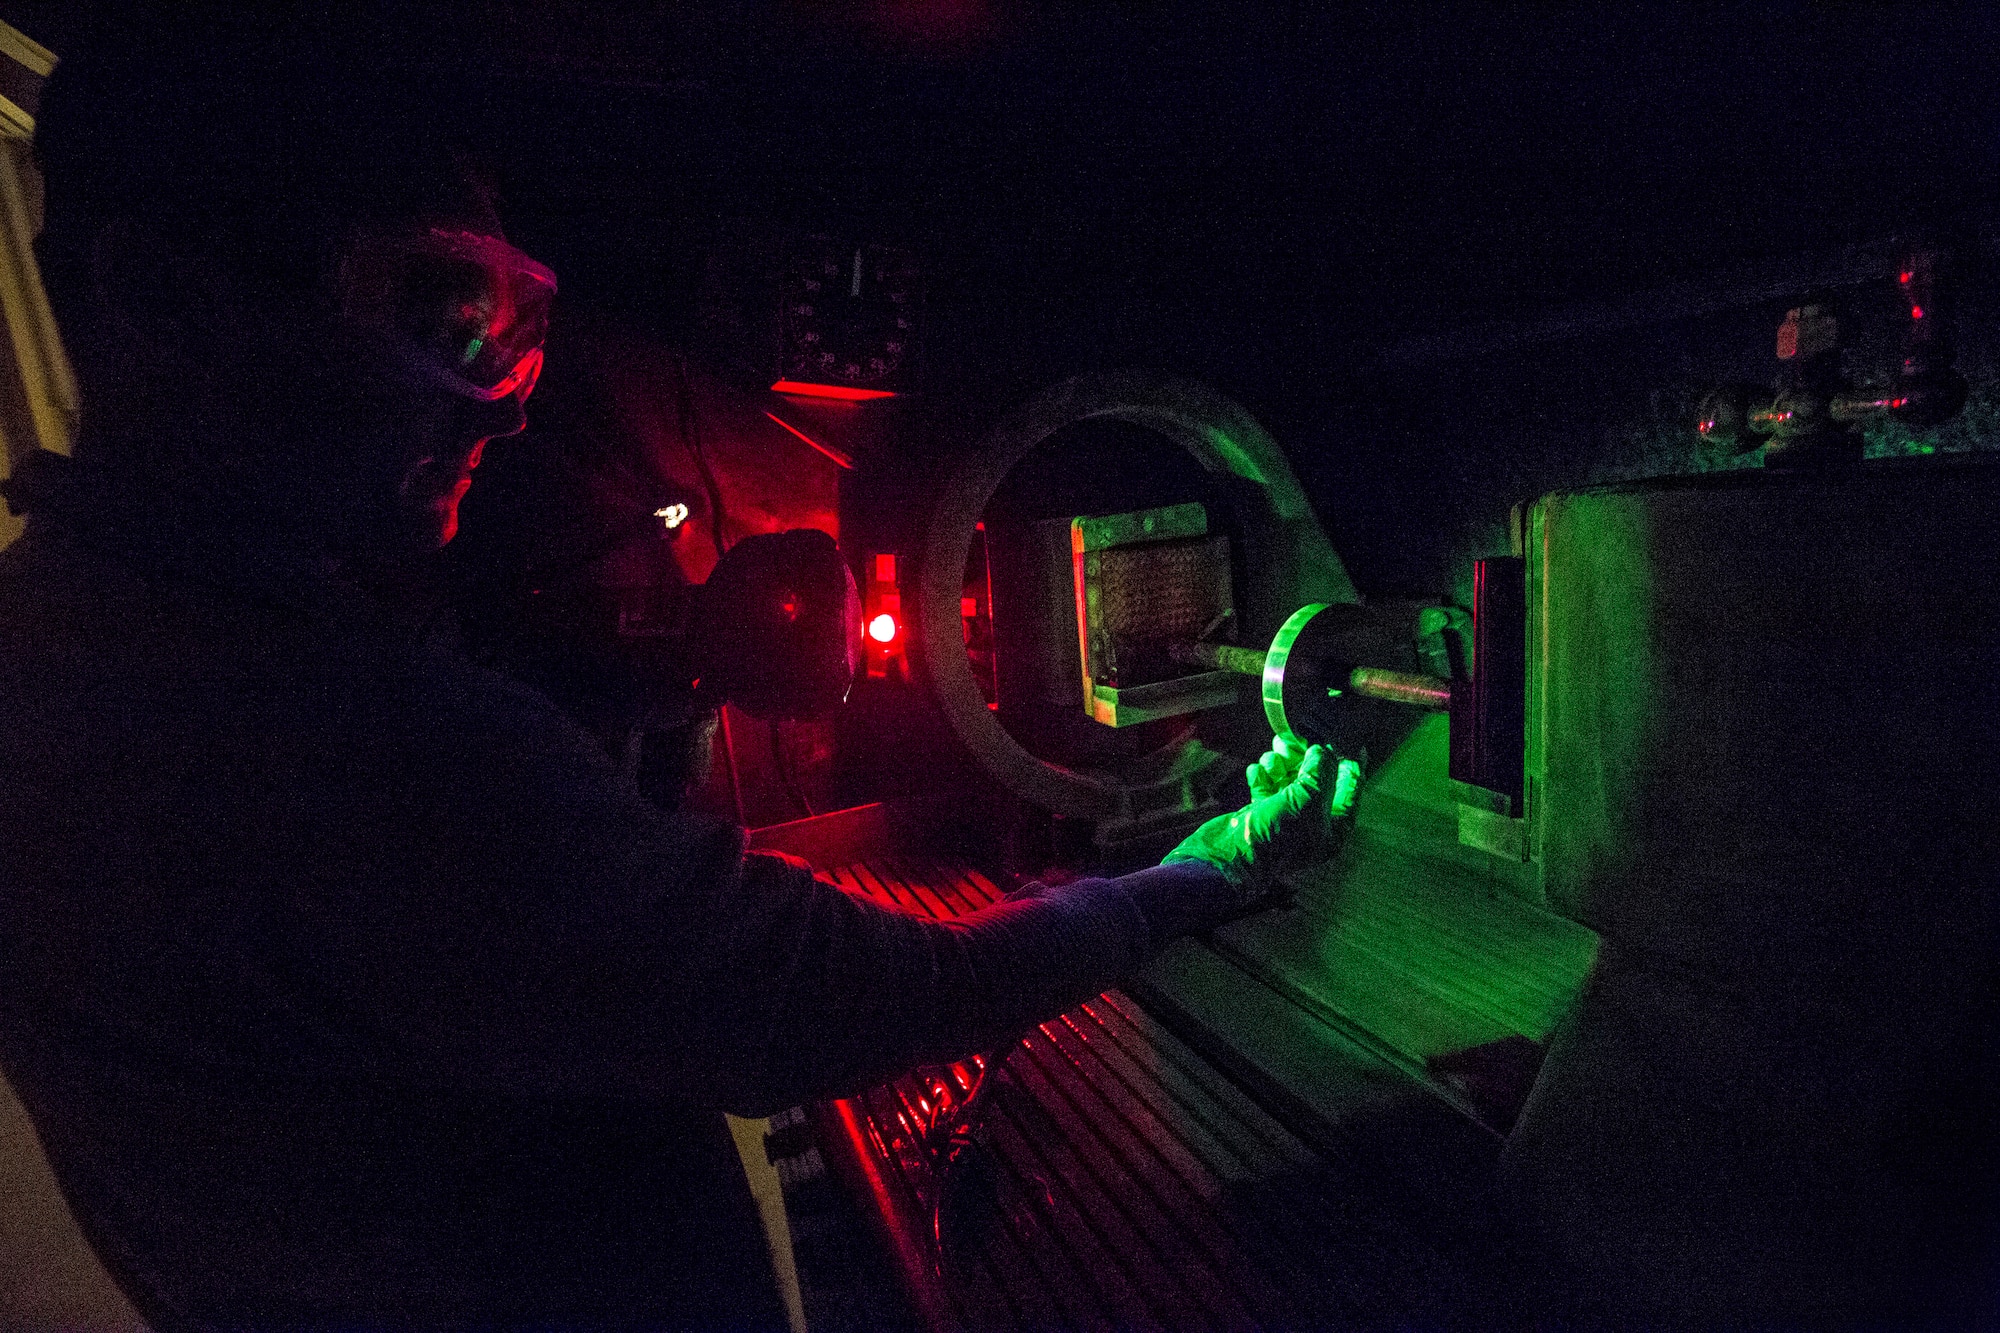 Senior Airman Lucas Derflinger, non-destructive inspection journeyman, 108th Wing, performs a process control using a ketos ring and a central bar conductor on the magnetic particle inspection unit prior to inspecting aircraft parts at Joint Base McGuire-Dix-Lakehurst, N.J., March 7, 2015. The process control involves magnetizing the part, which is then bathed in a suspended particle bath. The bath seeps into the defects and when it is exposed to ultraviolet light – black light, causes the defects to become florescent and visible. The New Jersey Air National Guard NDI Airmen provide support to the structural maintenance program, which ensures that the KC-135R Stratotankers are mission-ready. (U.S. Air National Guard photo by Master Sgt. Mark C. Olsen/Released)